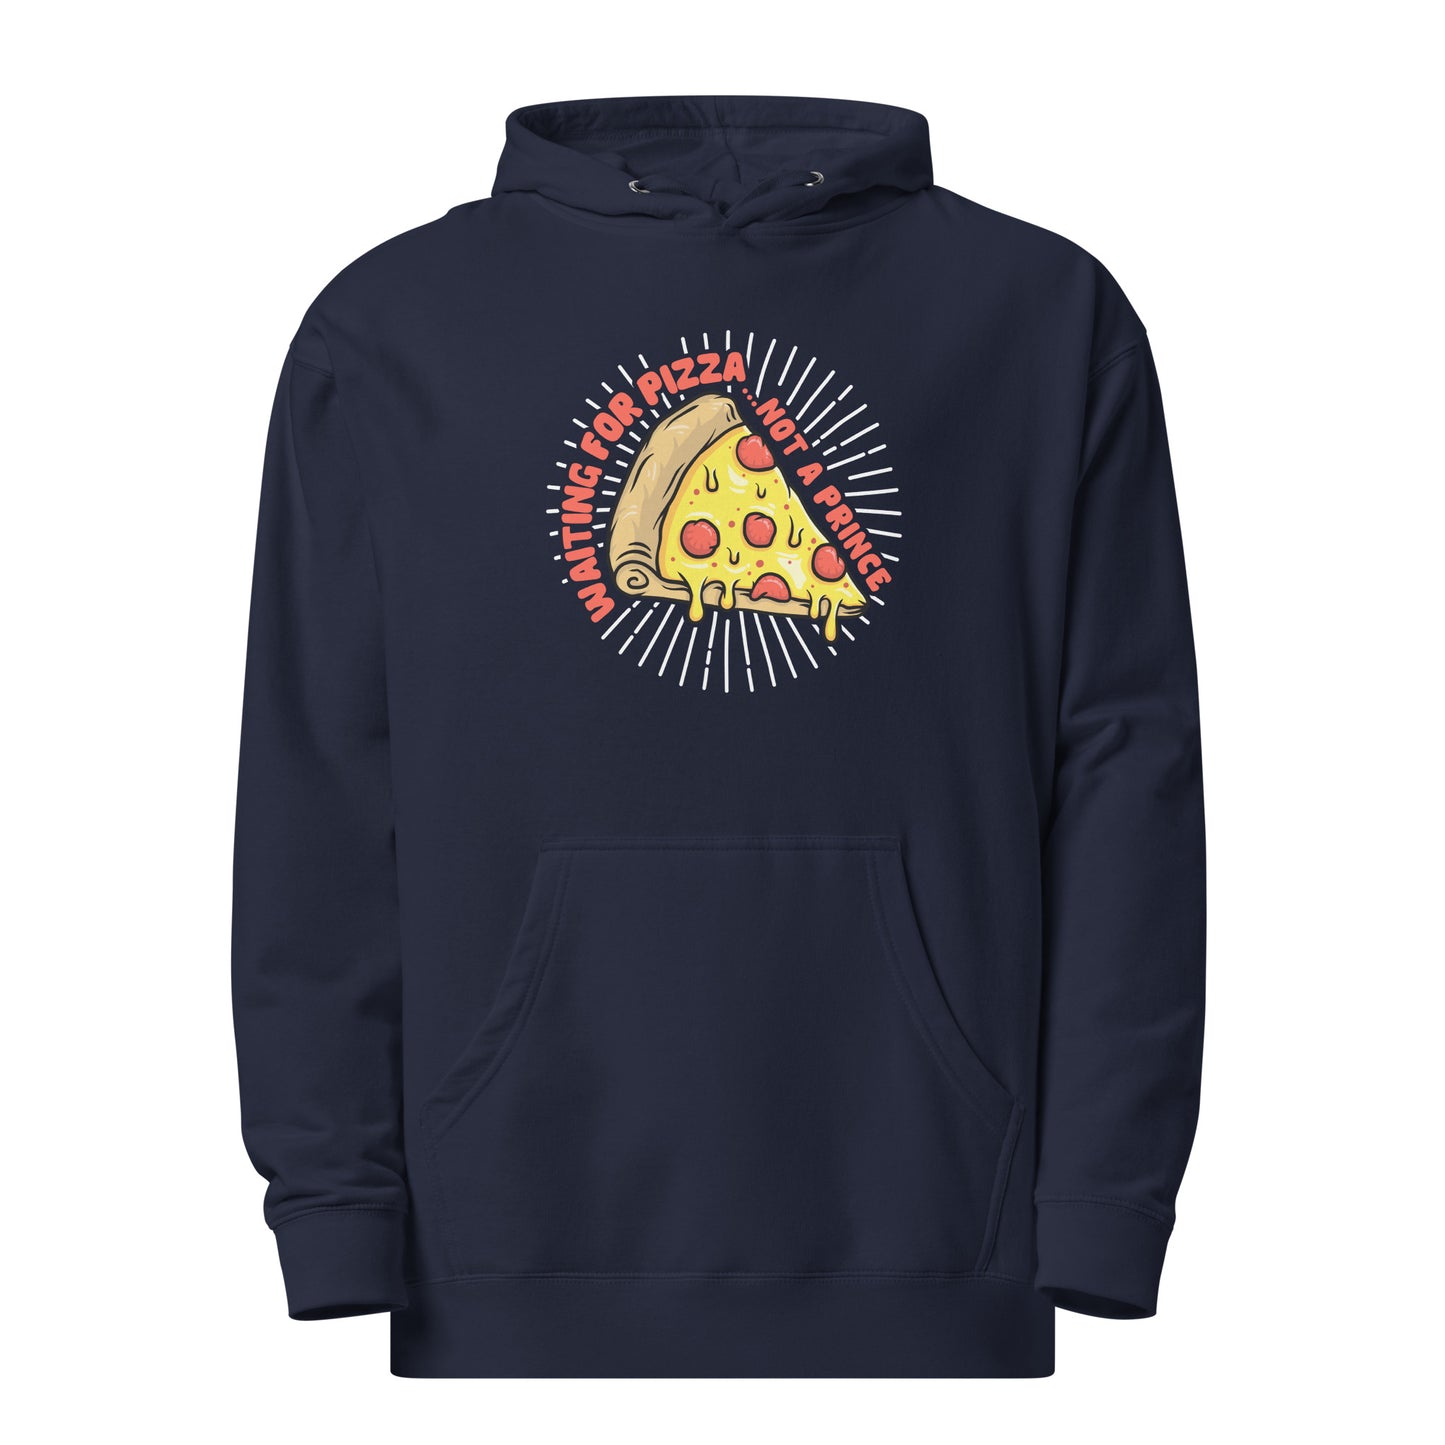 Adult 'Waiting for Pizza' Midweight Hoodie